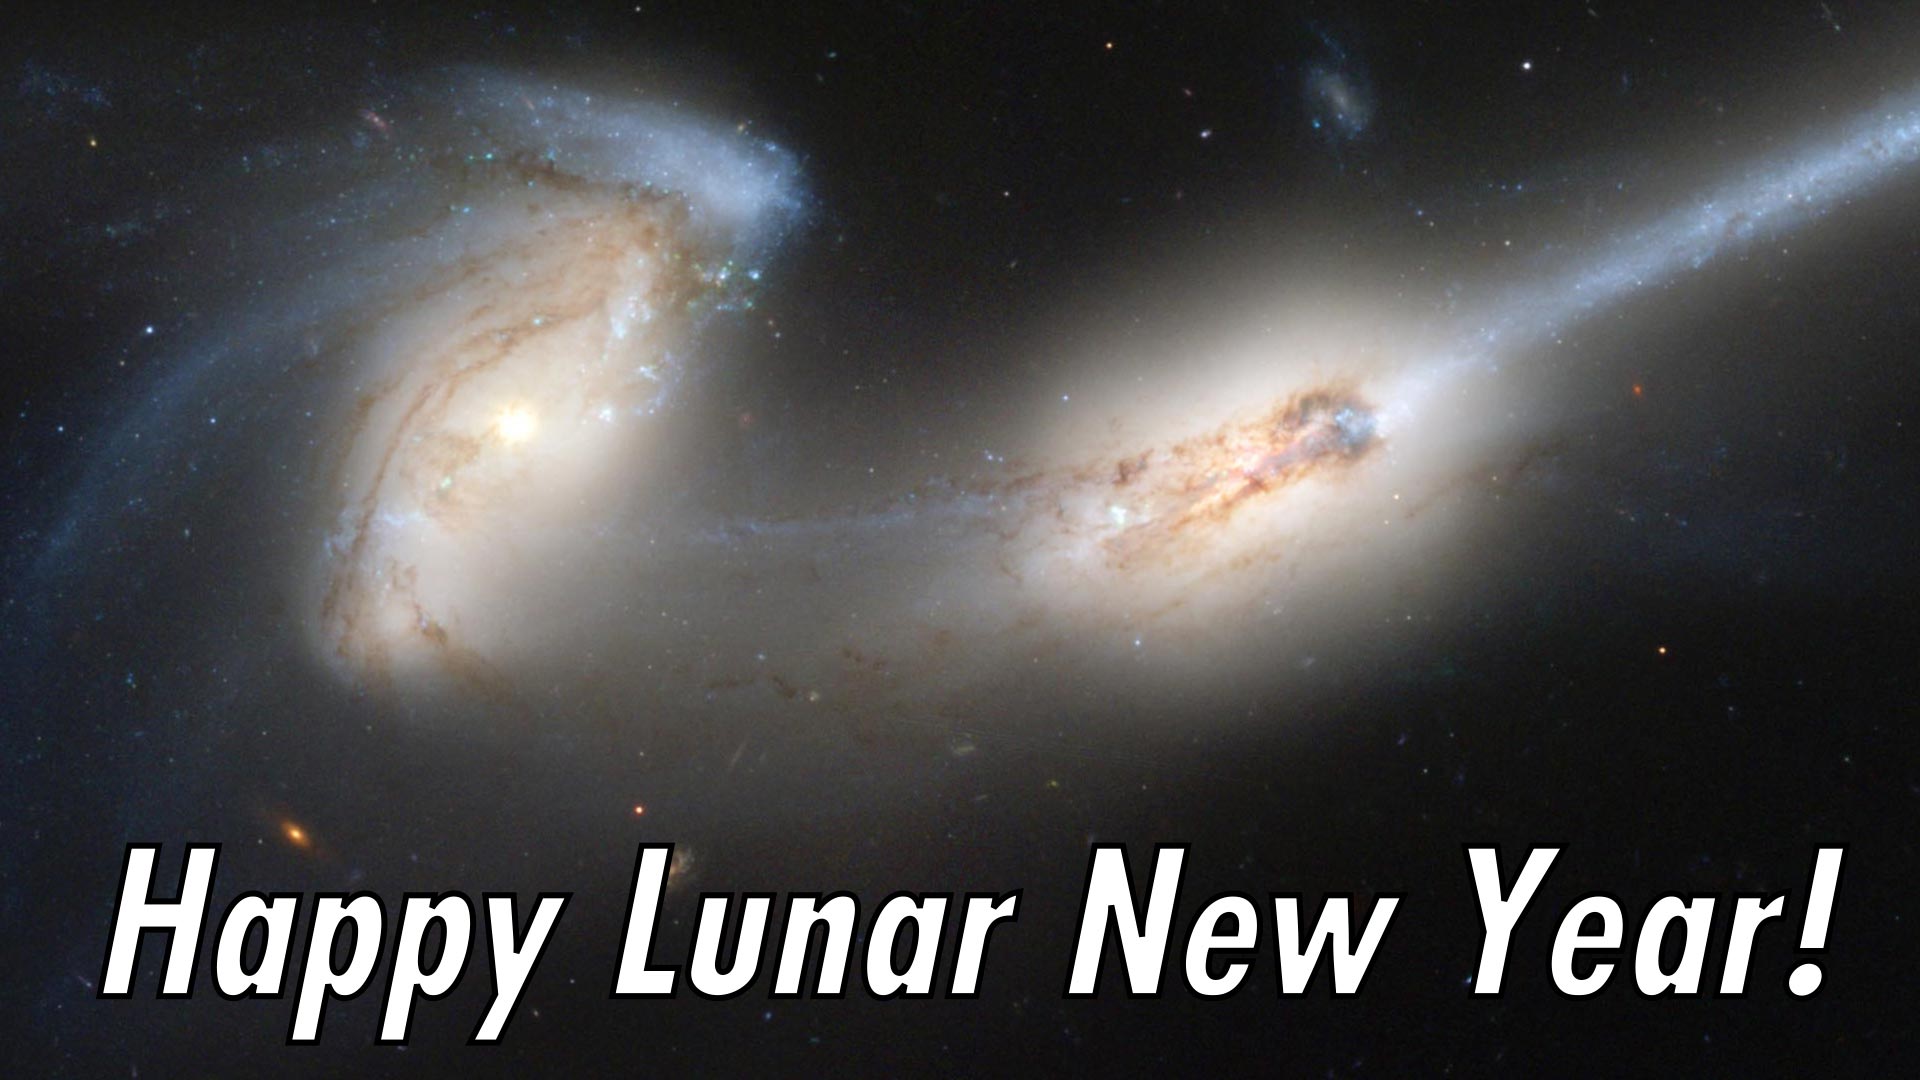 Happy Lunar New Year From the Hubble Space Telescope [Video]1920 x 1080